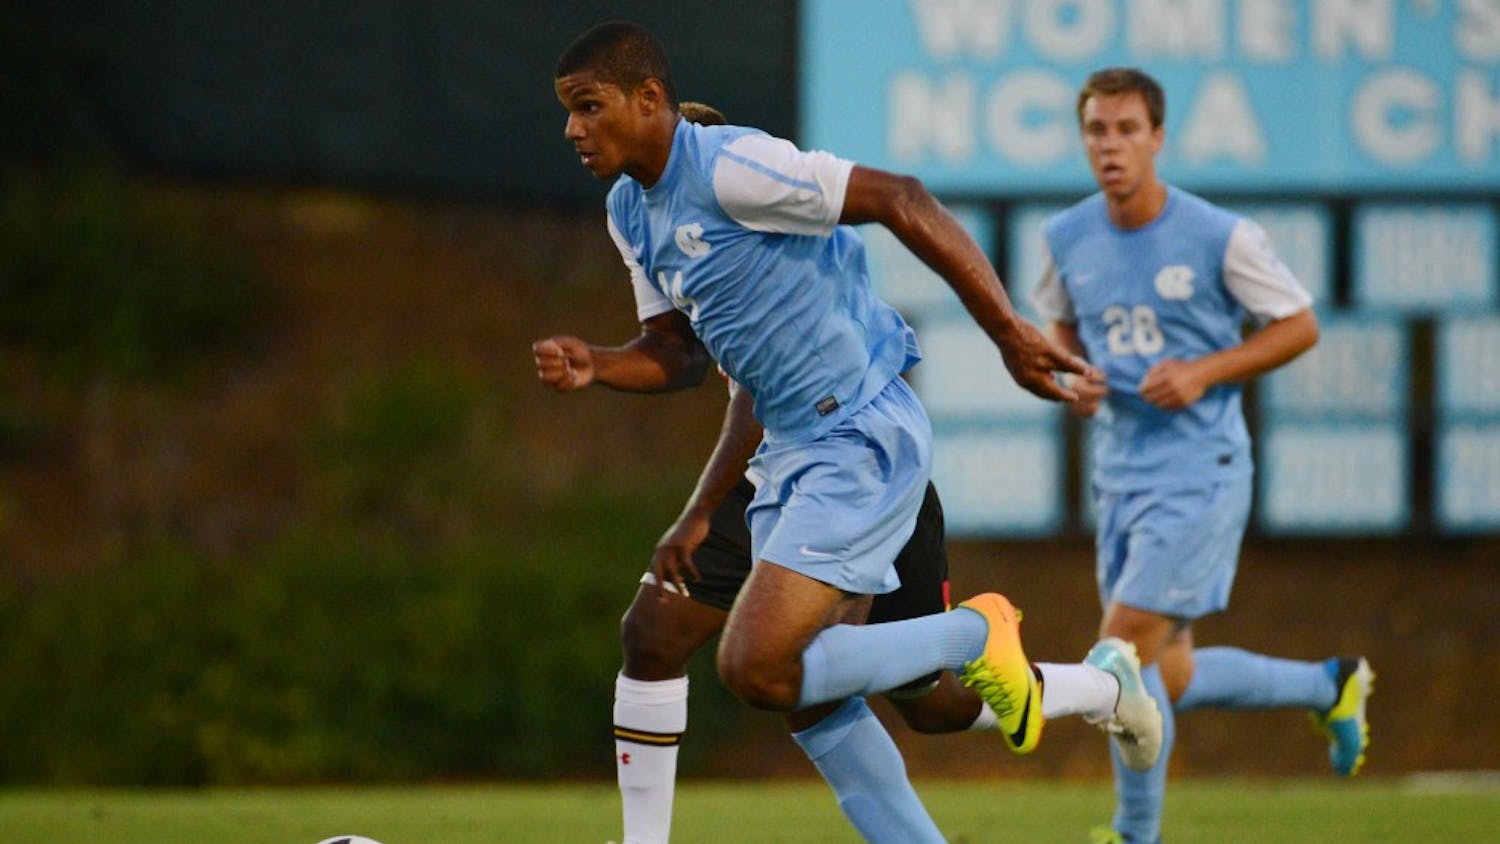 UNC midfielder Omar Holness (14) dribbles the ball up the middle of the field.